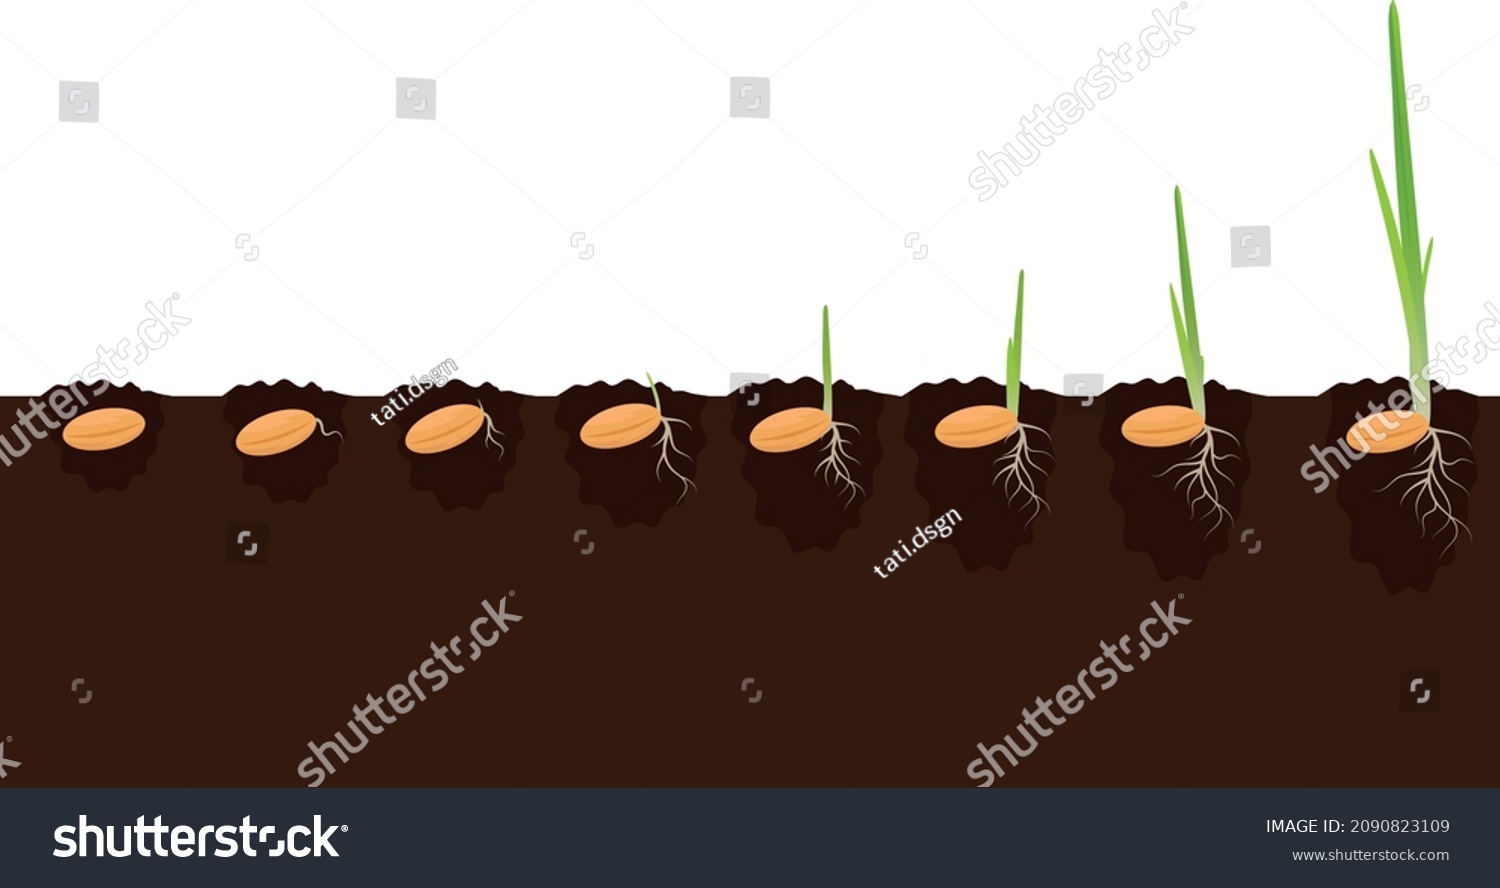 Plant growth phases stages in soil. Evolution germination progress concept. Sprout seeds of corn, millet, barley, wheat, oats growing organic agriculture. Isolated illustration on white background. #2090823109